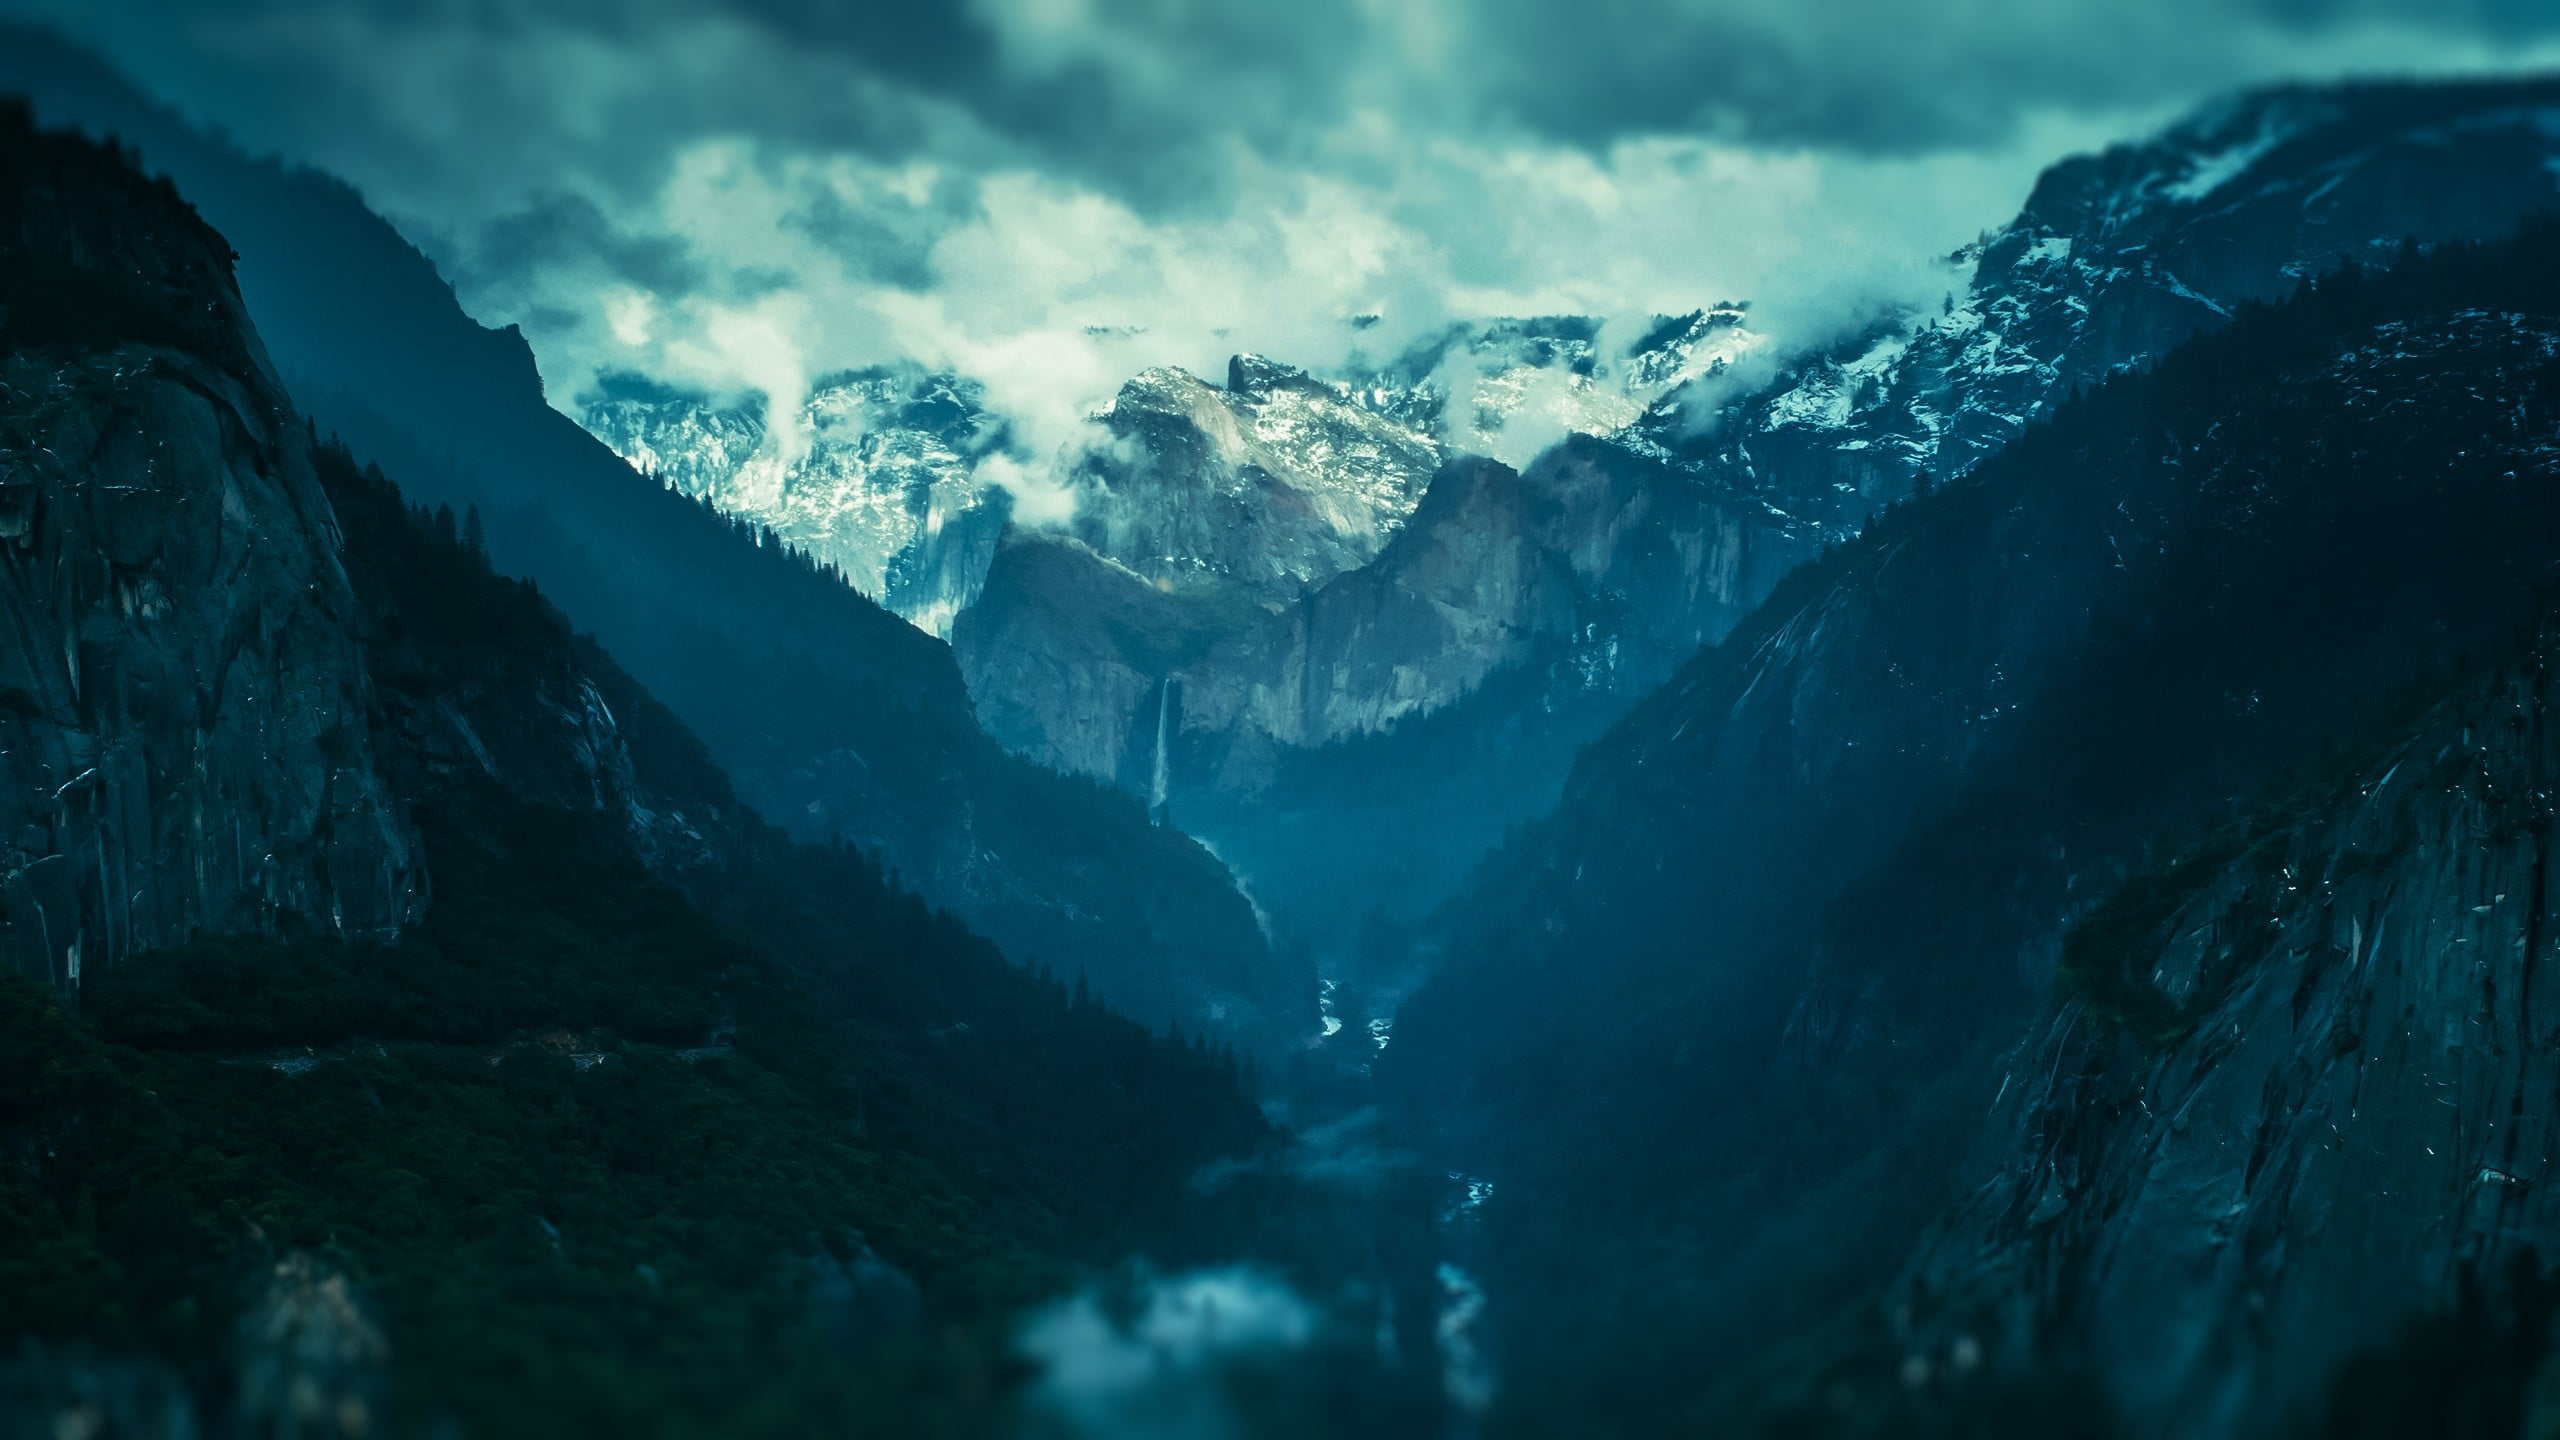 mountains under gray cloudy sky, nature, mountains